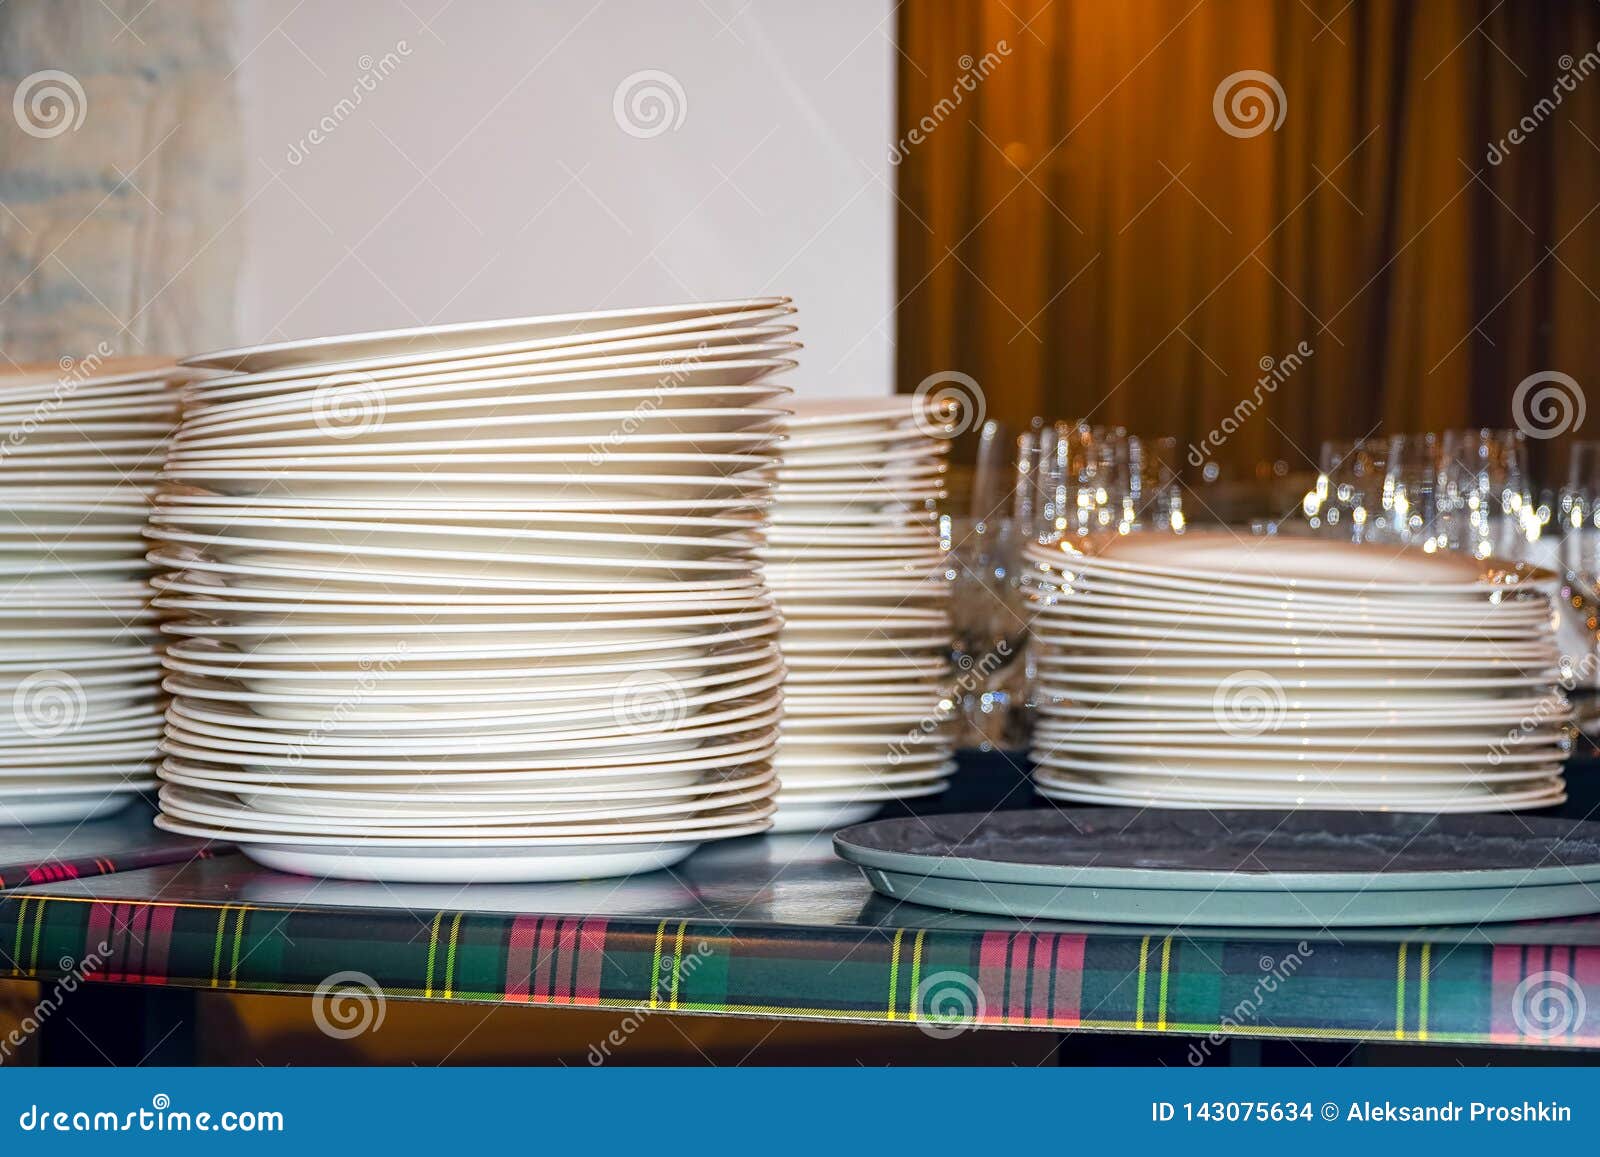 Clean White Plates Stacked on Table Stock Photo - Image of buffet ...